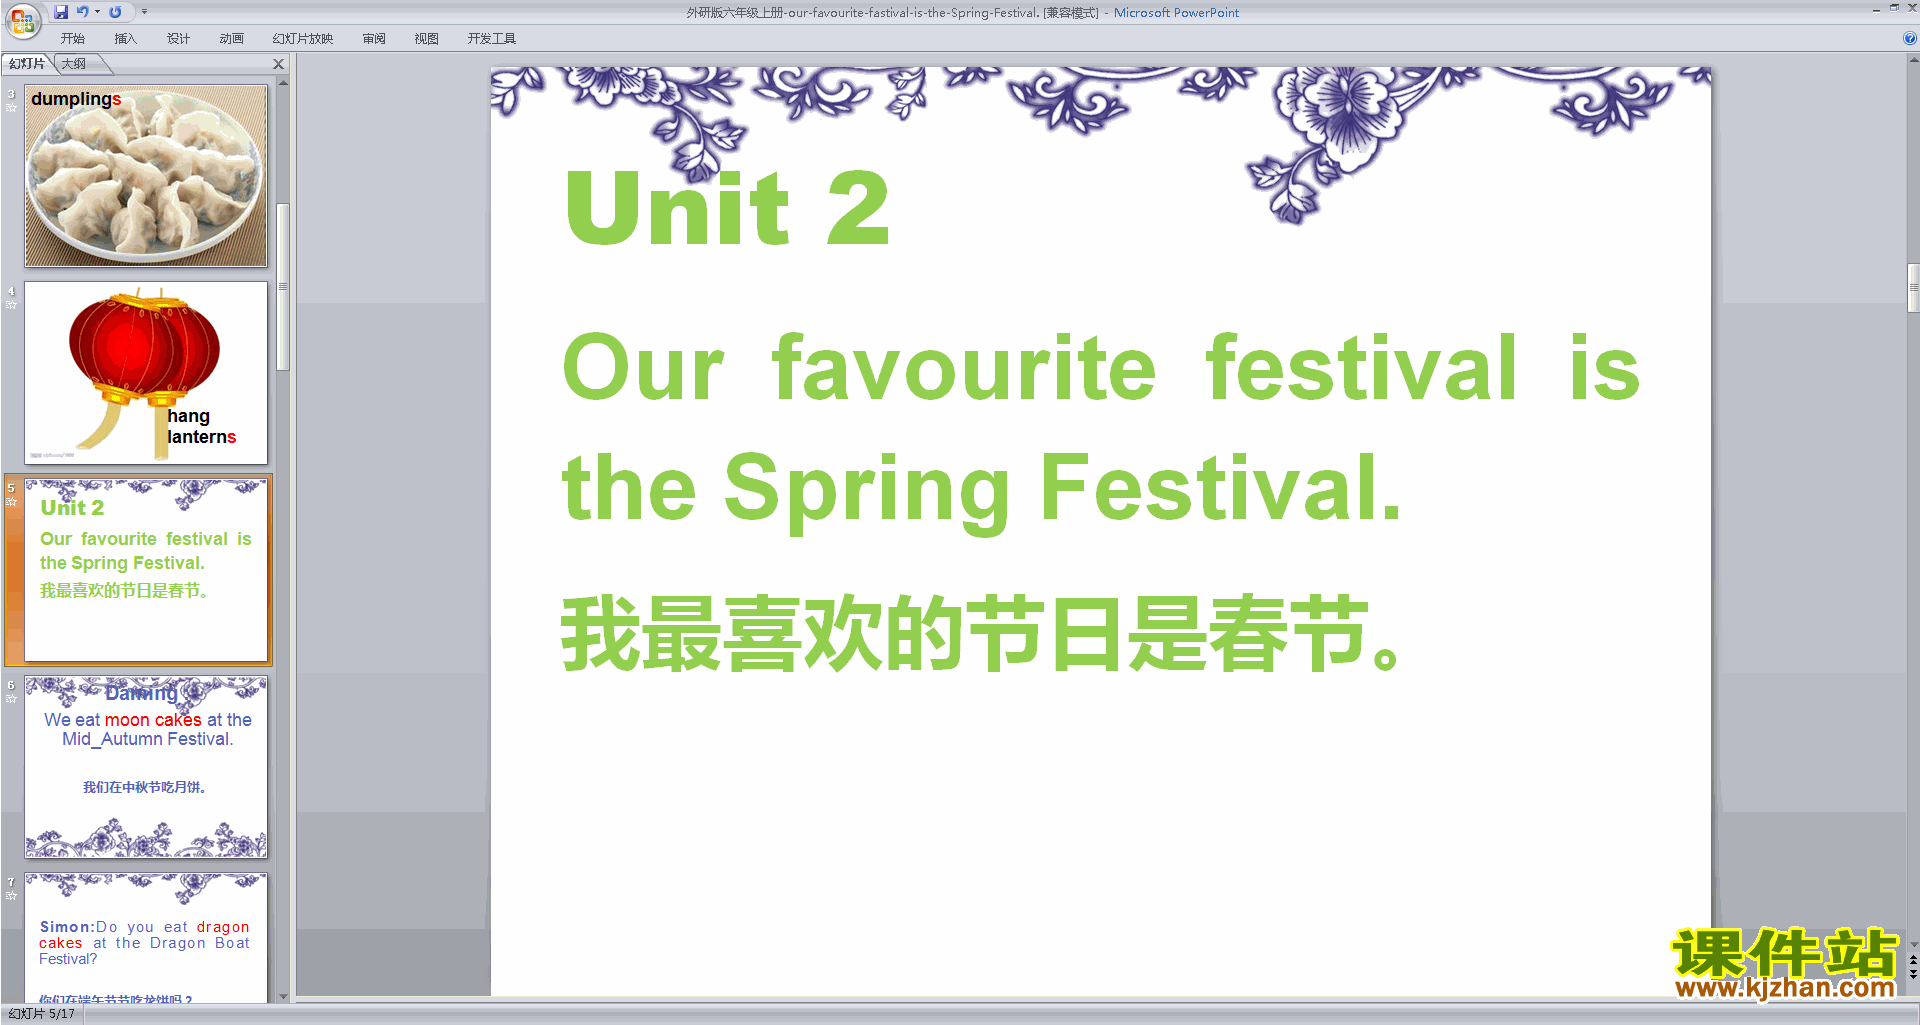 Our favourite festival is the Spring Festival pptμ14